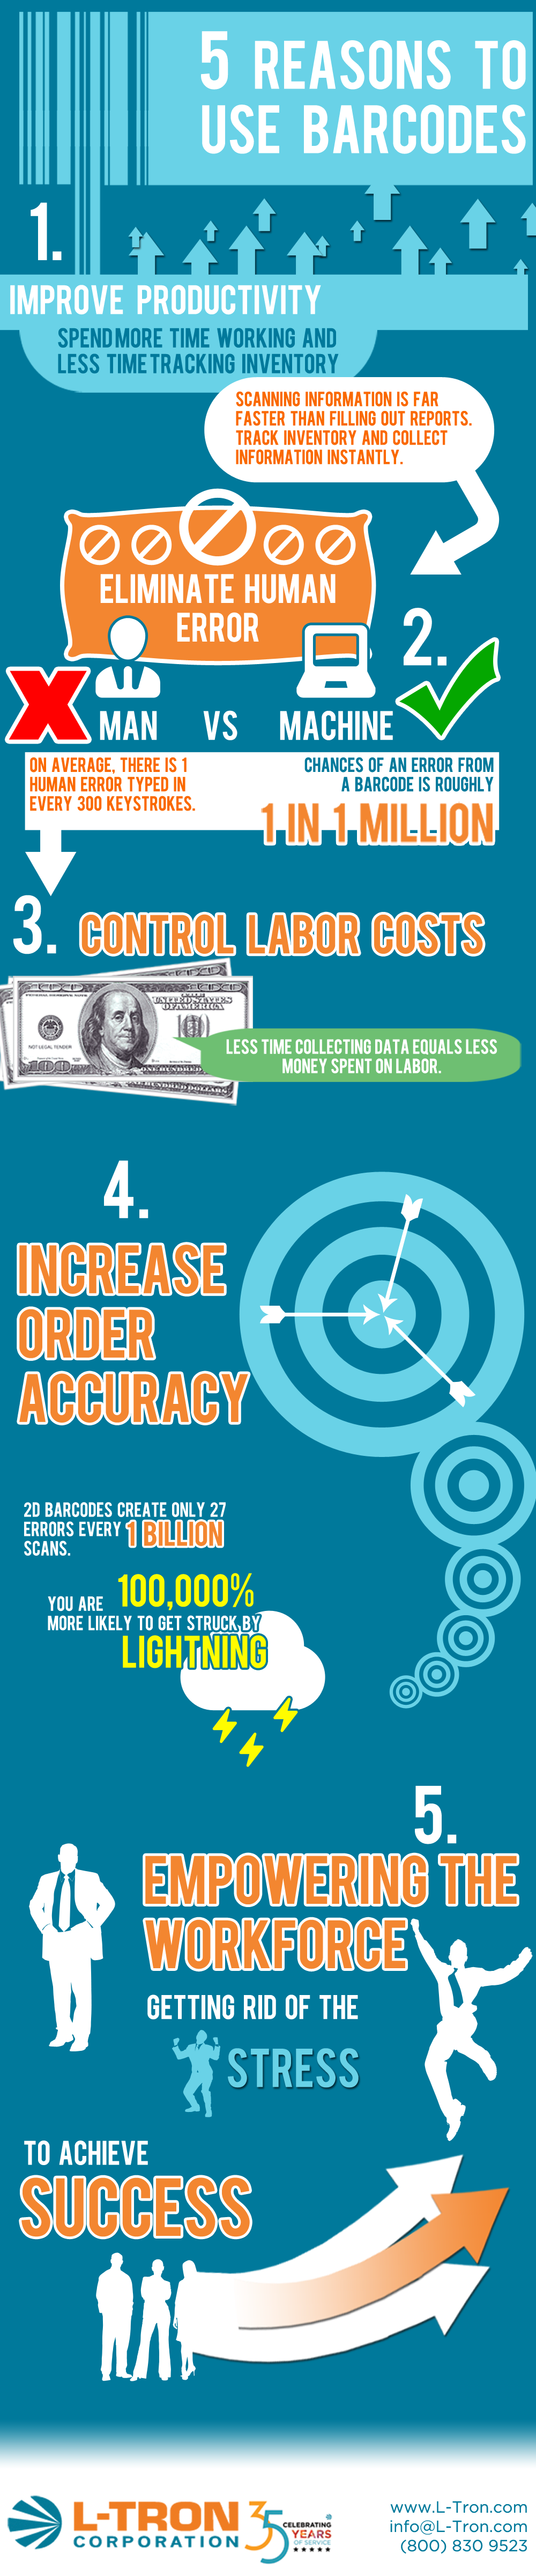 Infographic on 5 reasons why you should use barcodes